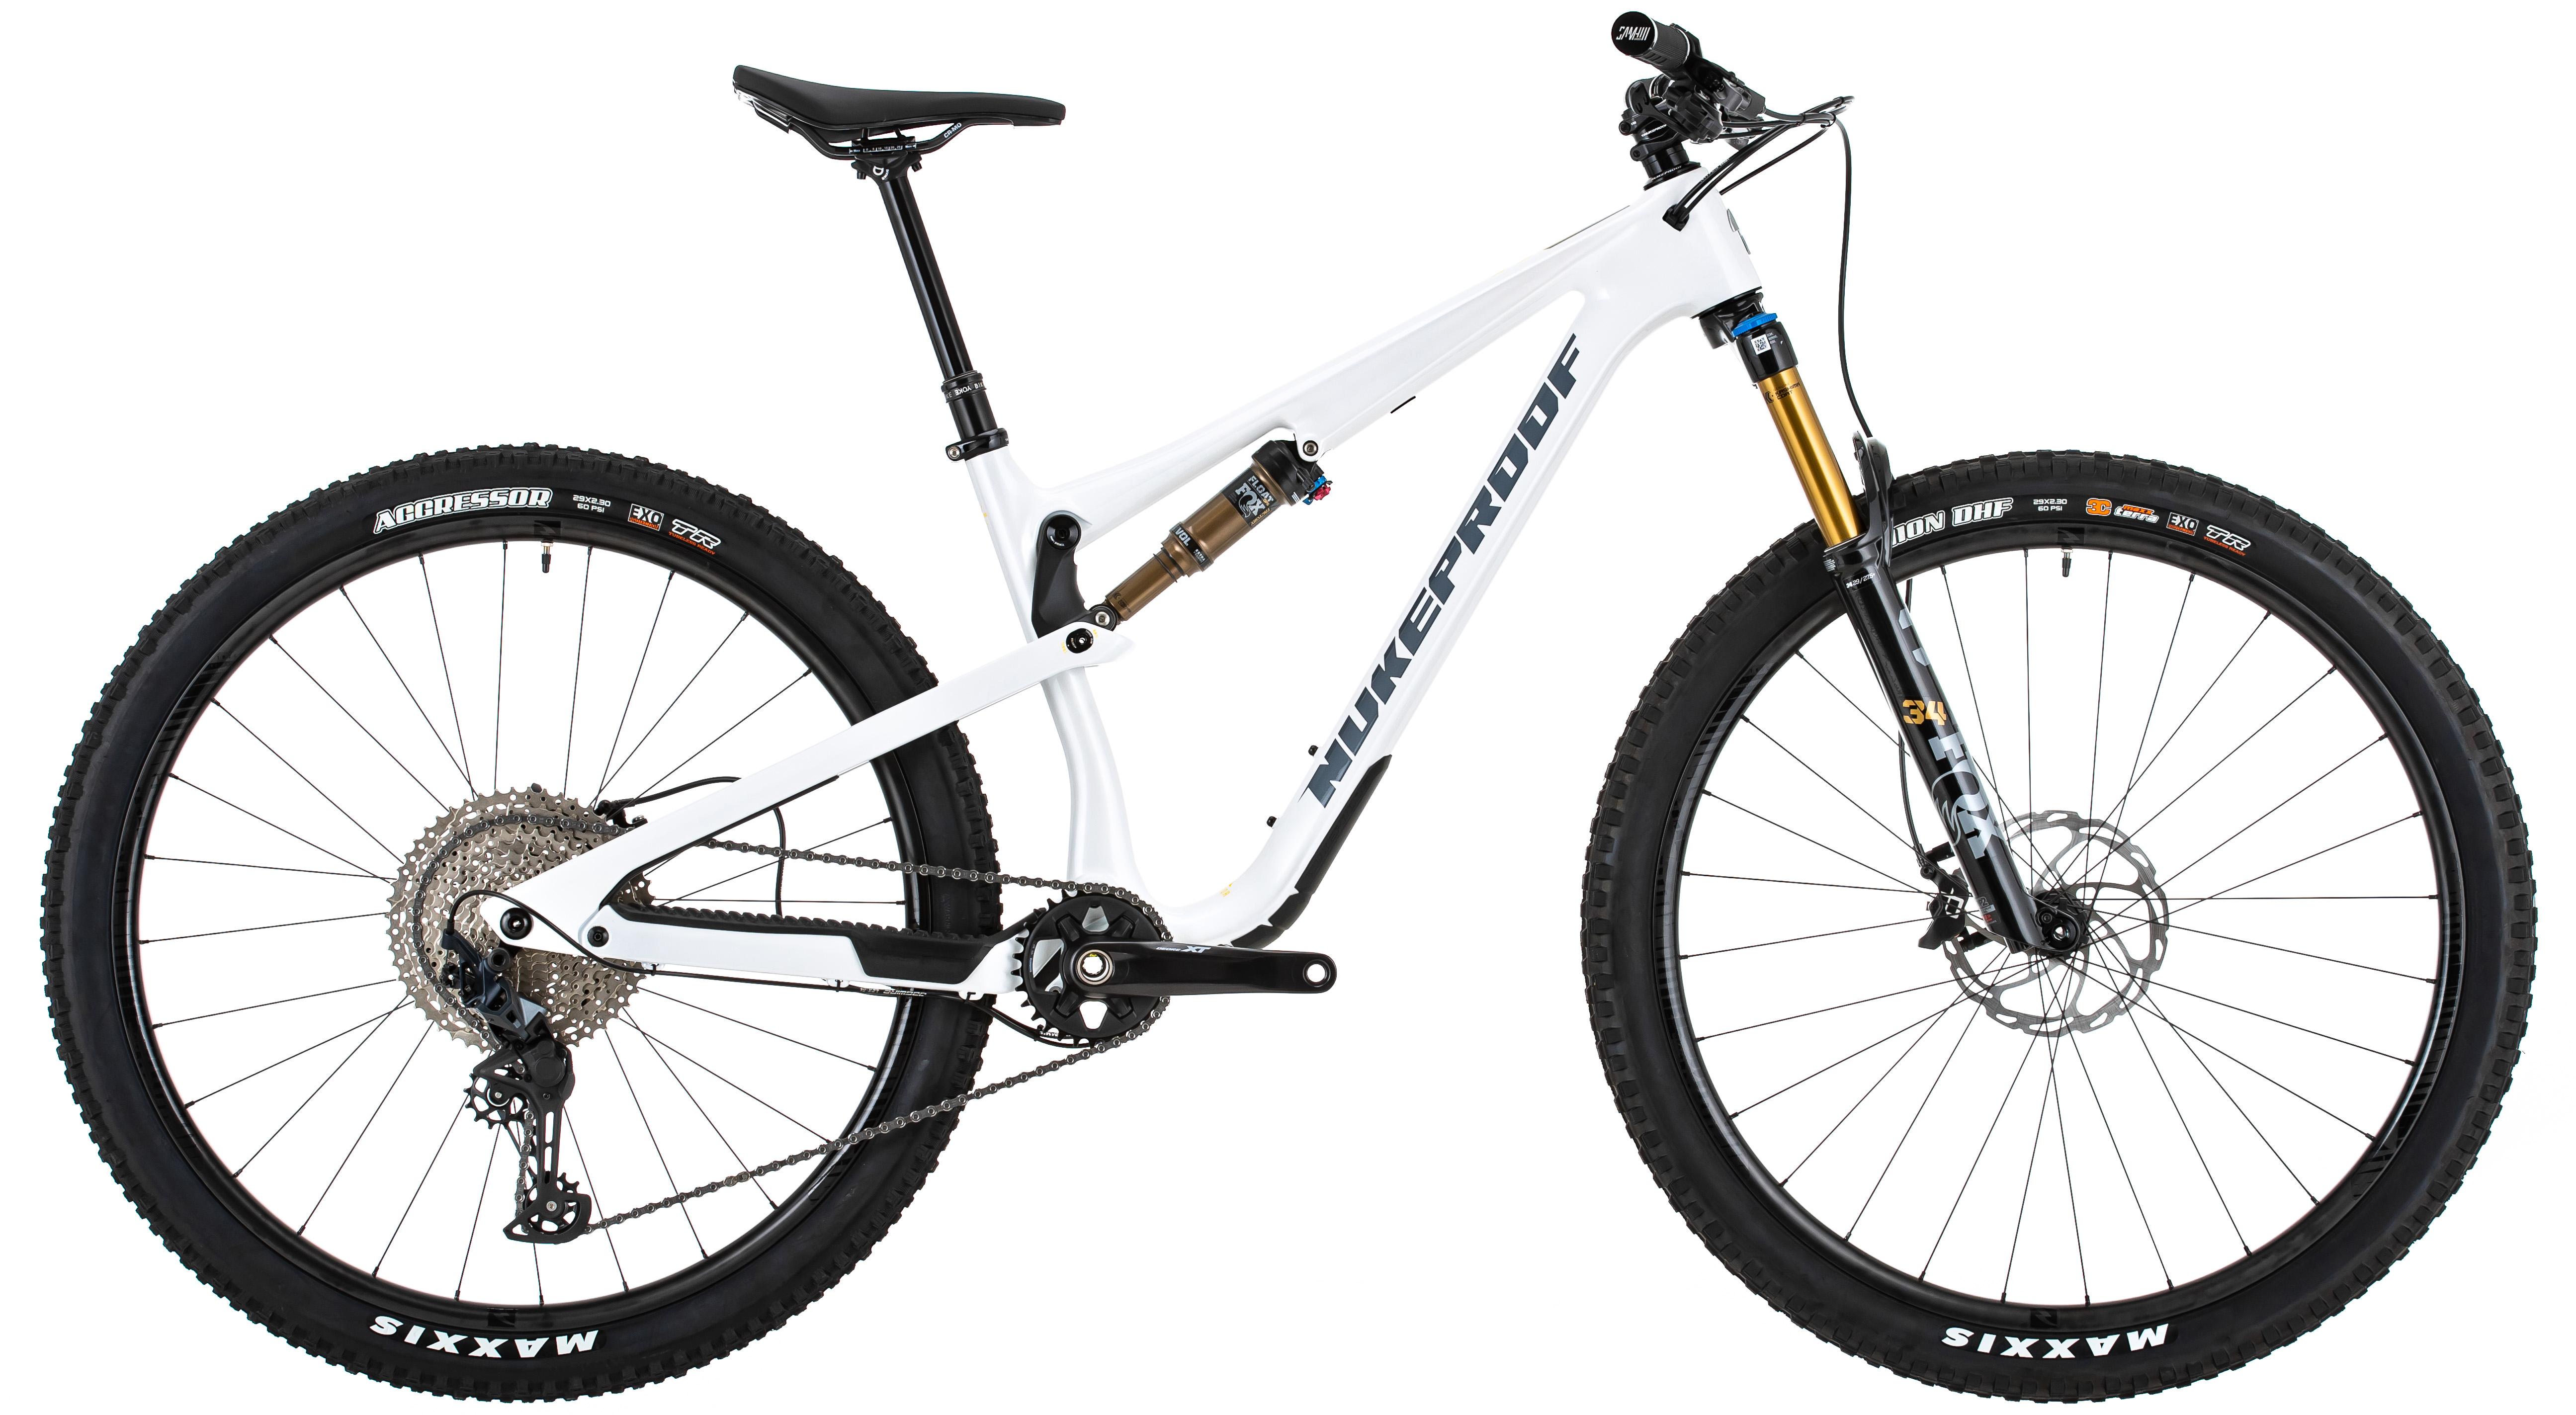 Nukeproof Reactor 290 St Factory Carbon Bike - Off White